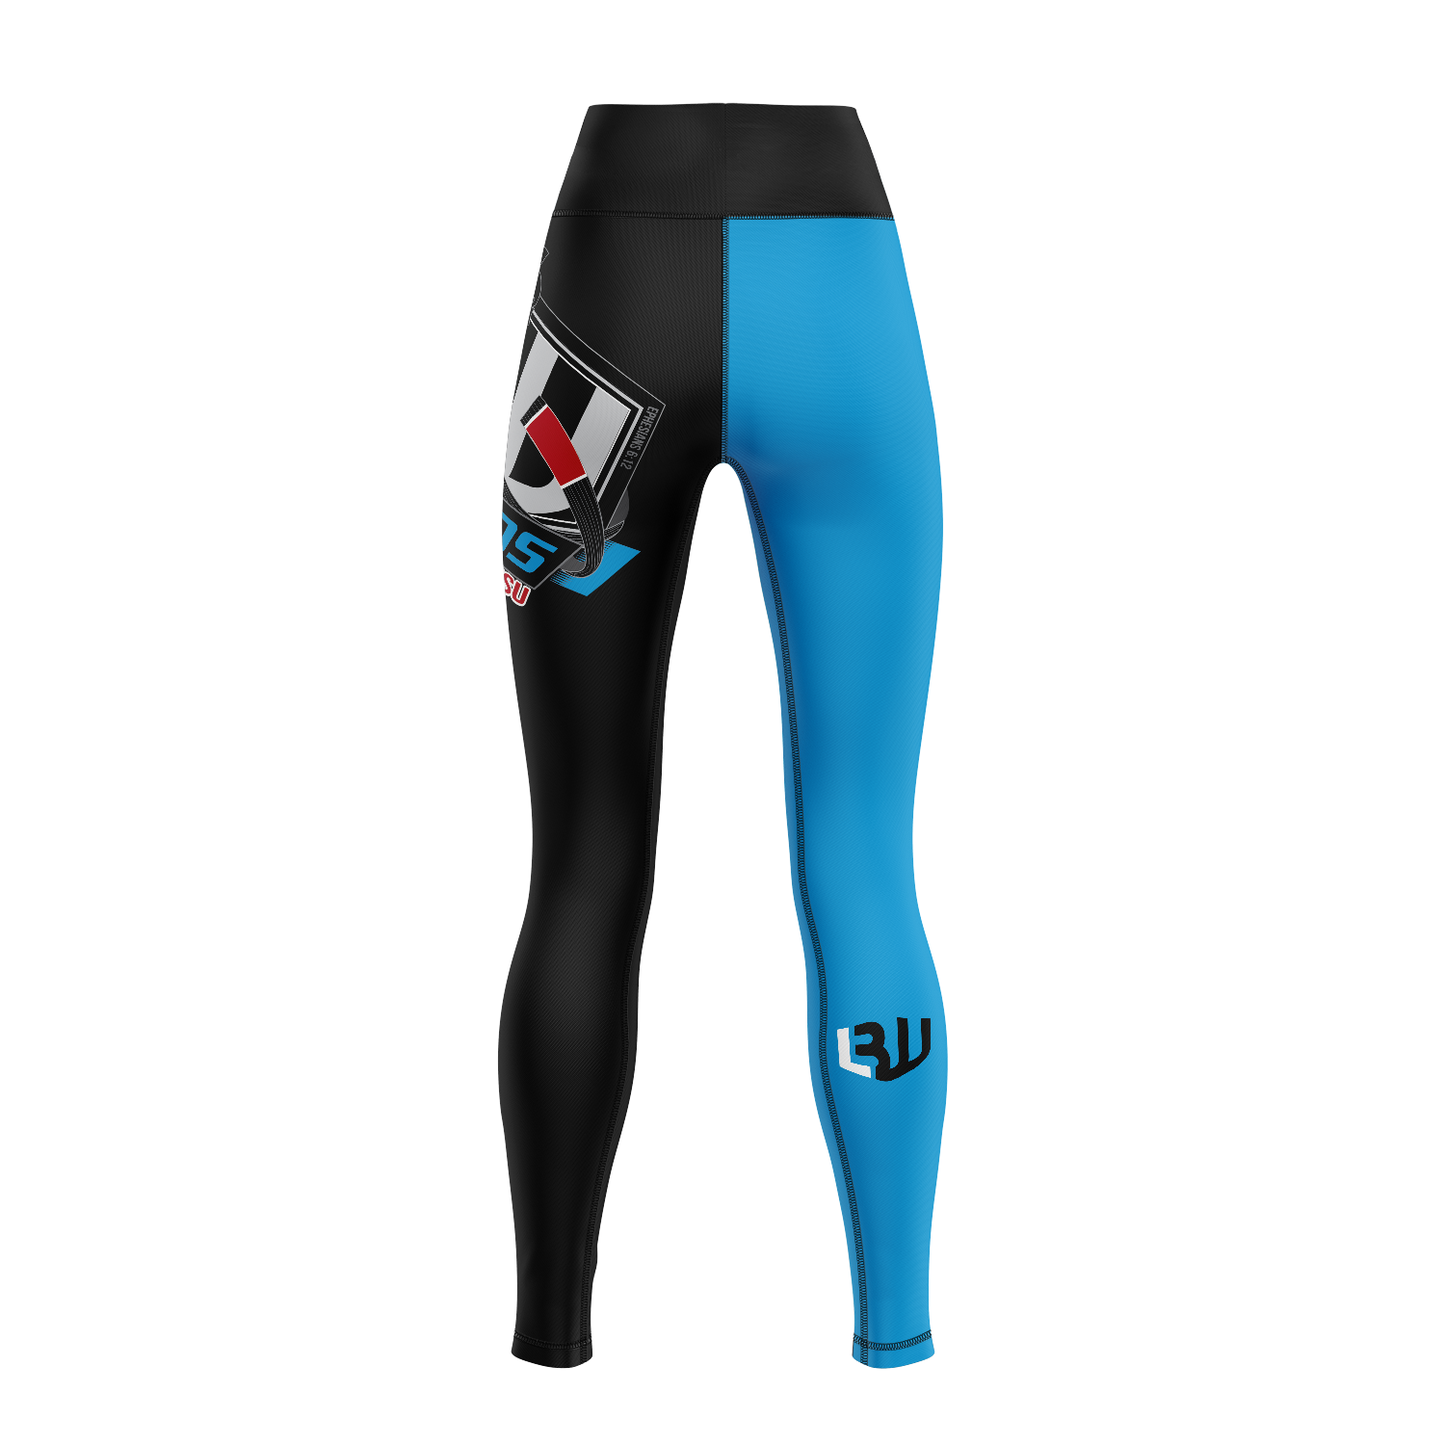 Legends BJJ women's high-waisted grappling tights Standard Issue, black and blue